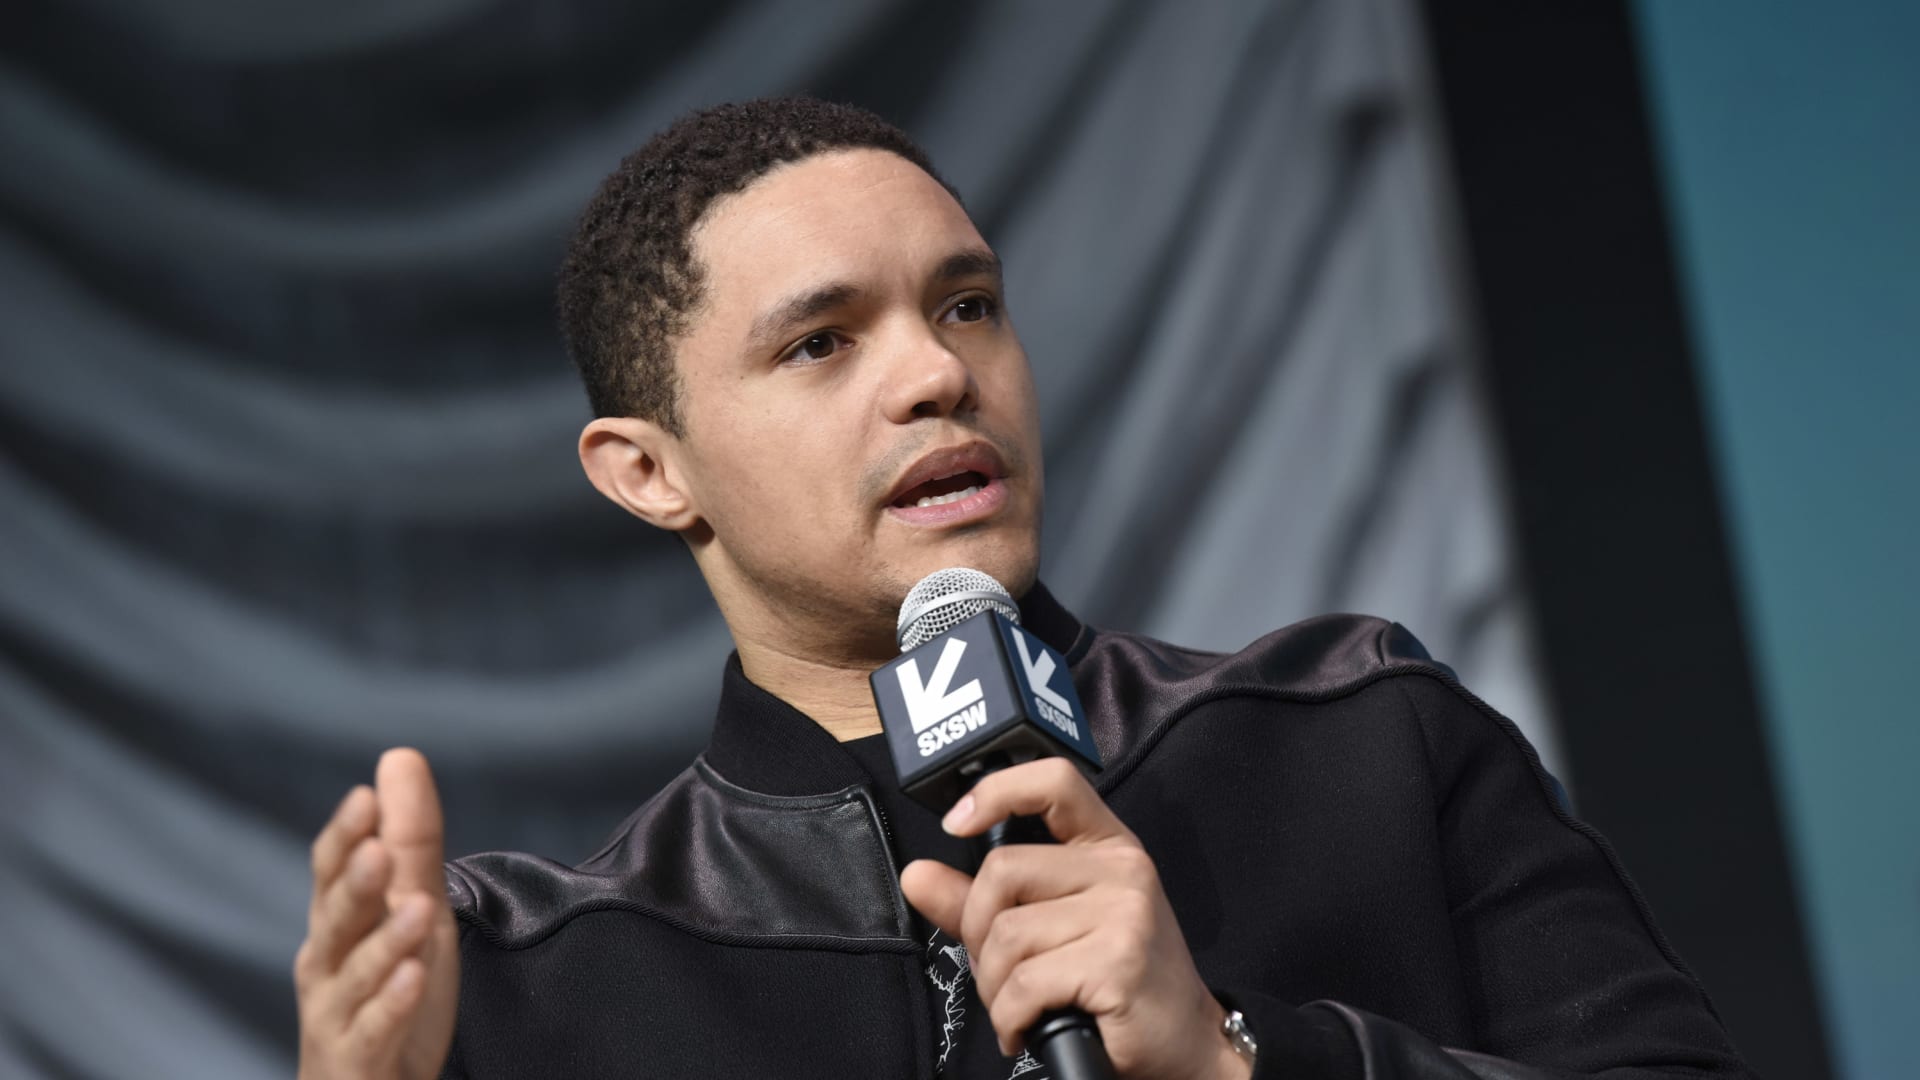 Trevor Noah speaks at SXSW Featured Session: Trevor Noah And The Daily Show News Team Panel Hard With Jake Tapper at Austin Convention Center on March 9, 2019 in Austin, Texas.(Photo by Vivien Killilea/Getty Images for Comedy Central)